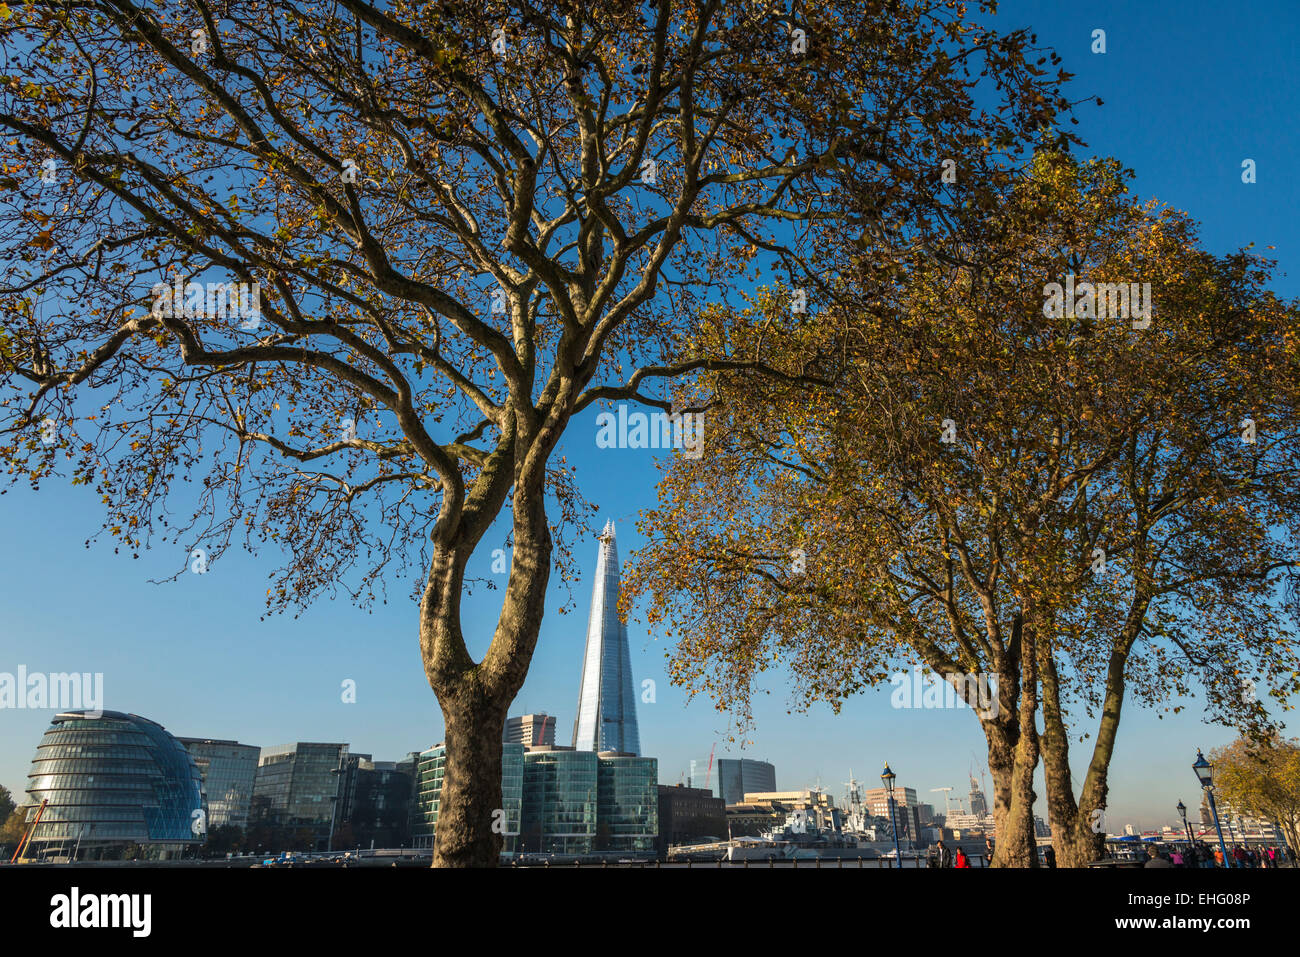 London Plane Trees on the north bank of the River Thames in central London with the Shard building behind - EDITORIAL USE ONLY Stock Photo